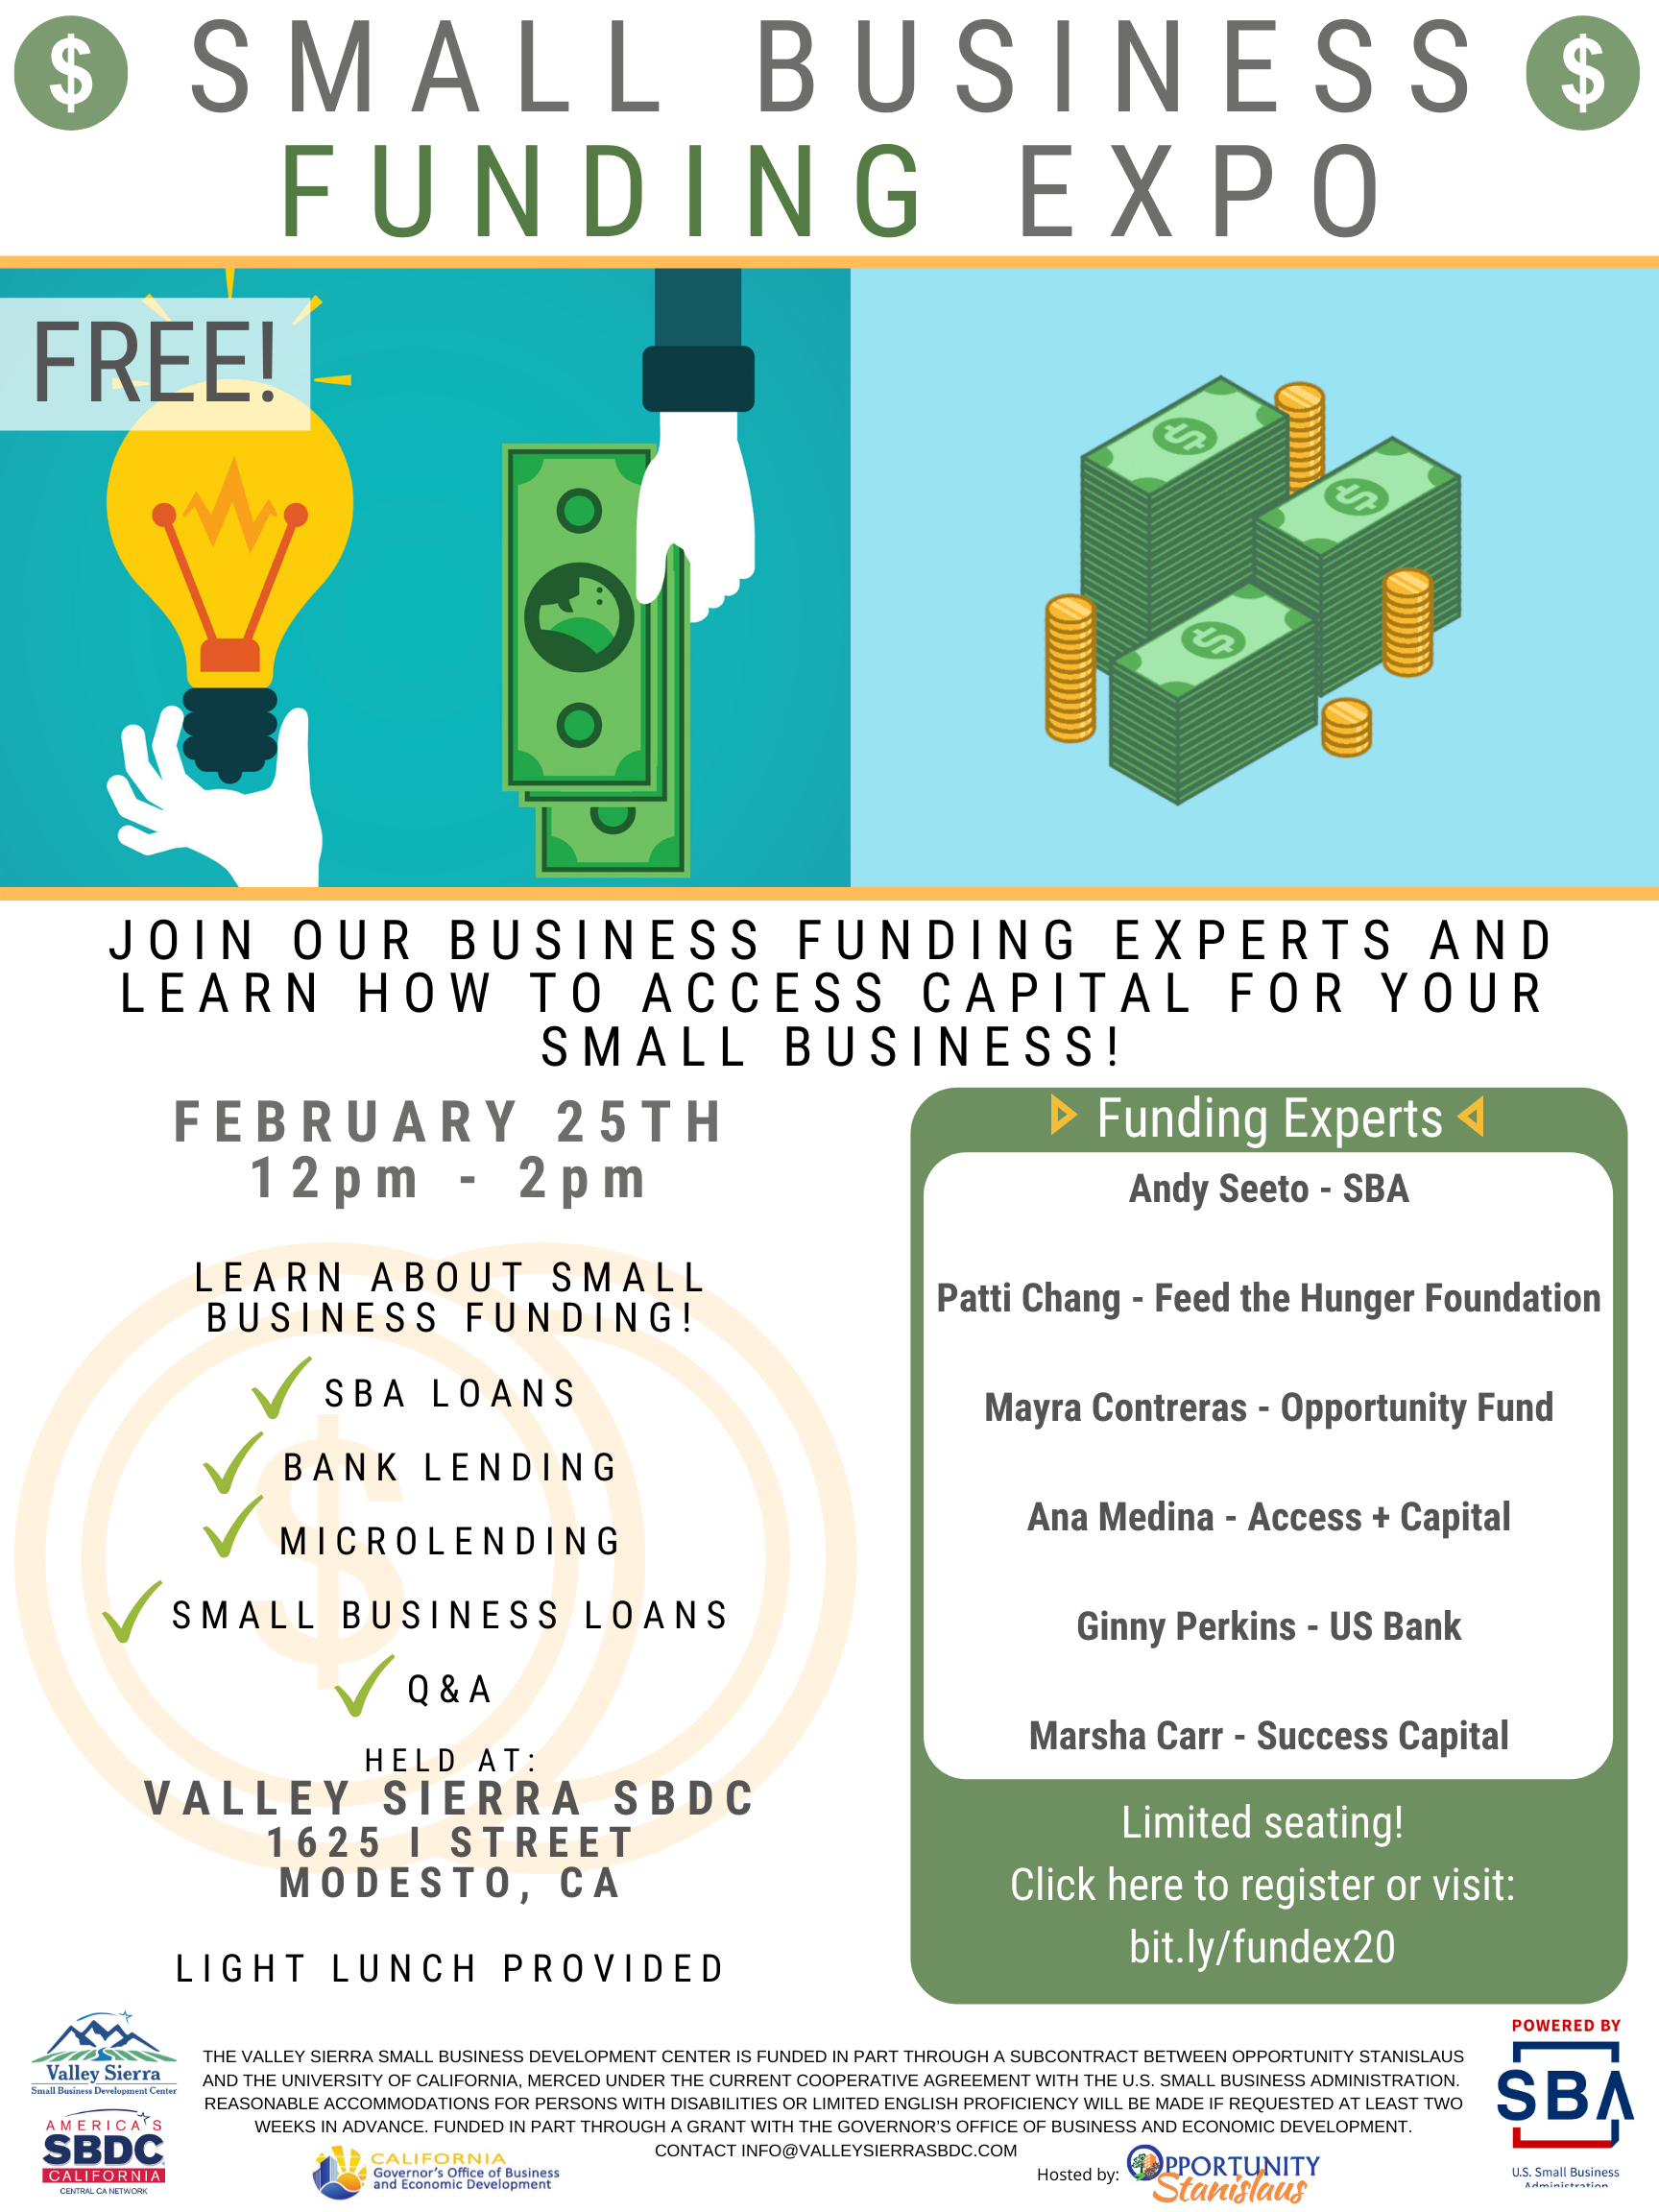 Event Flyer, Small Business Funding Expo, Feb 25th, Free. At the Valley Sierra SBDC.